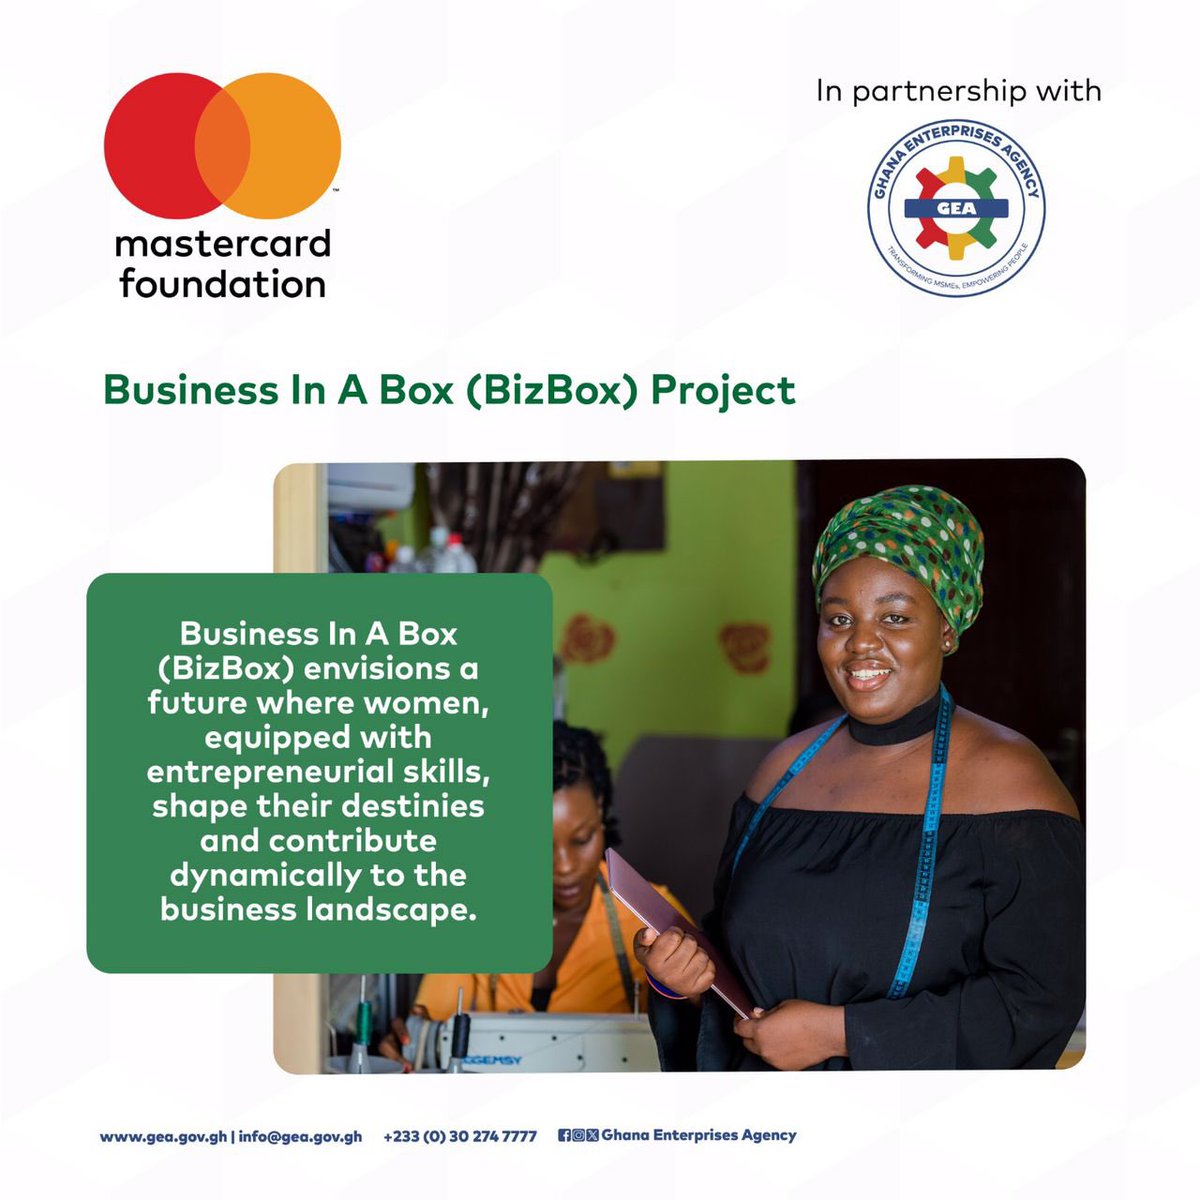 There is exponential growth when women have the tools to succeed

The Business In A Box Project is providing the right avenue and incentives for women to lead initiatives that break down barriers and unlock their limitless potential.

#BizBox #WomenEmpowerment #EmpoweredByHer